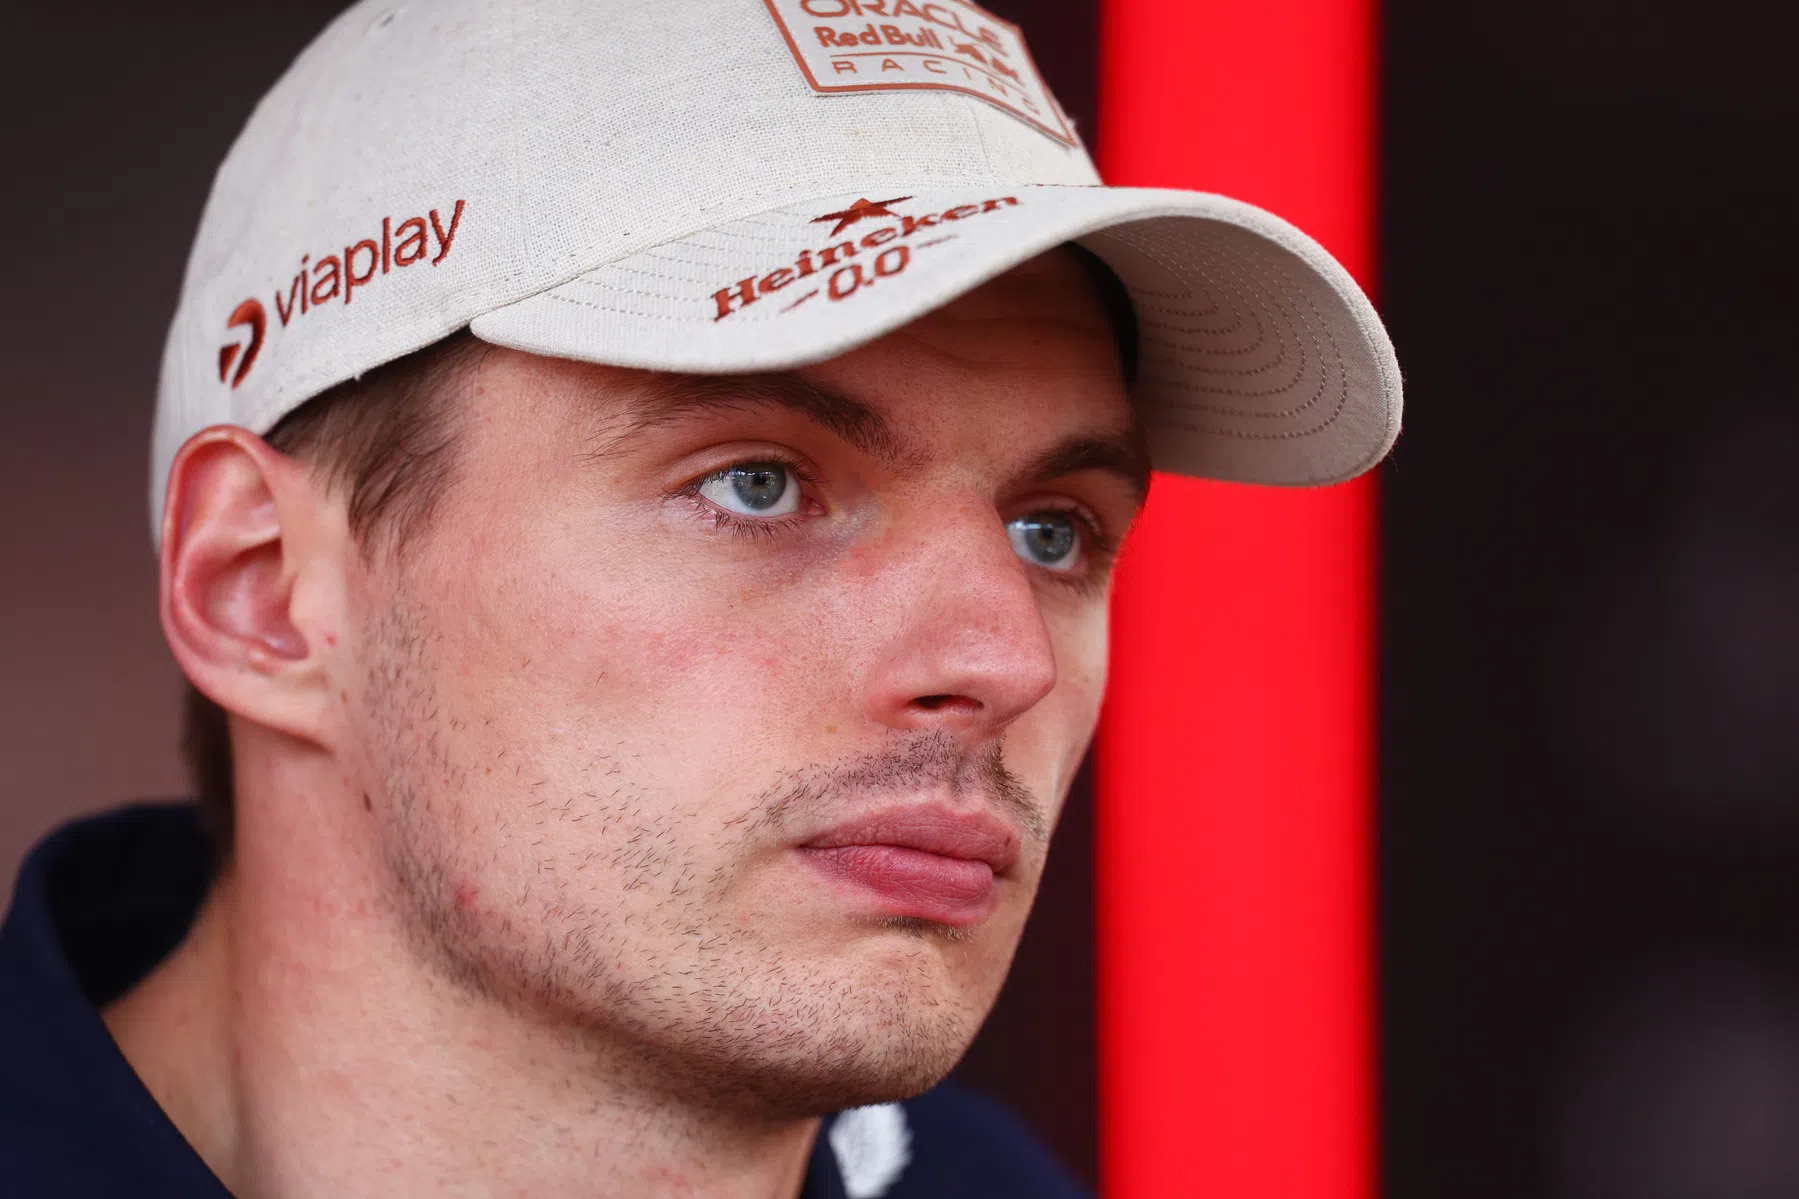 Max Verstappen on whether he made a mistake in qualifying monaco